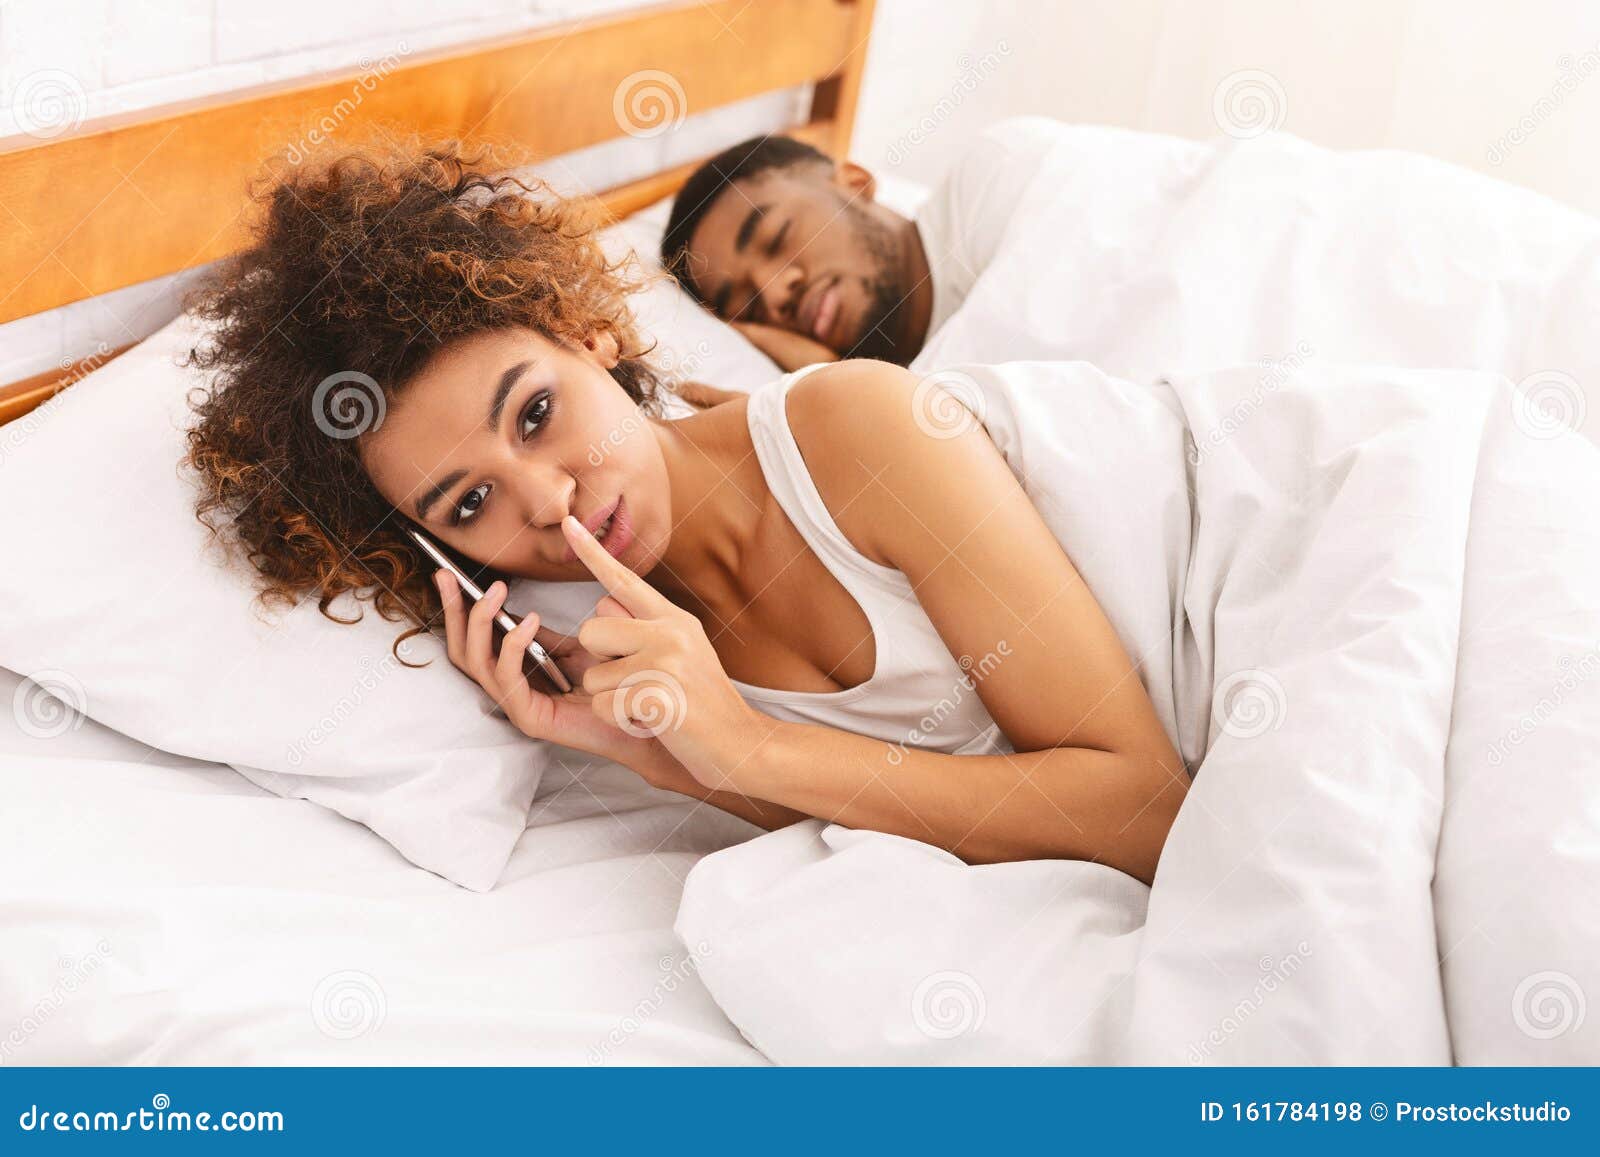 black wife cheater talking privately on cellphone in family bed